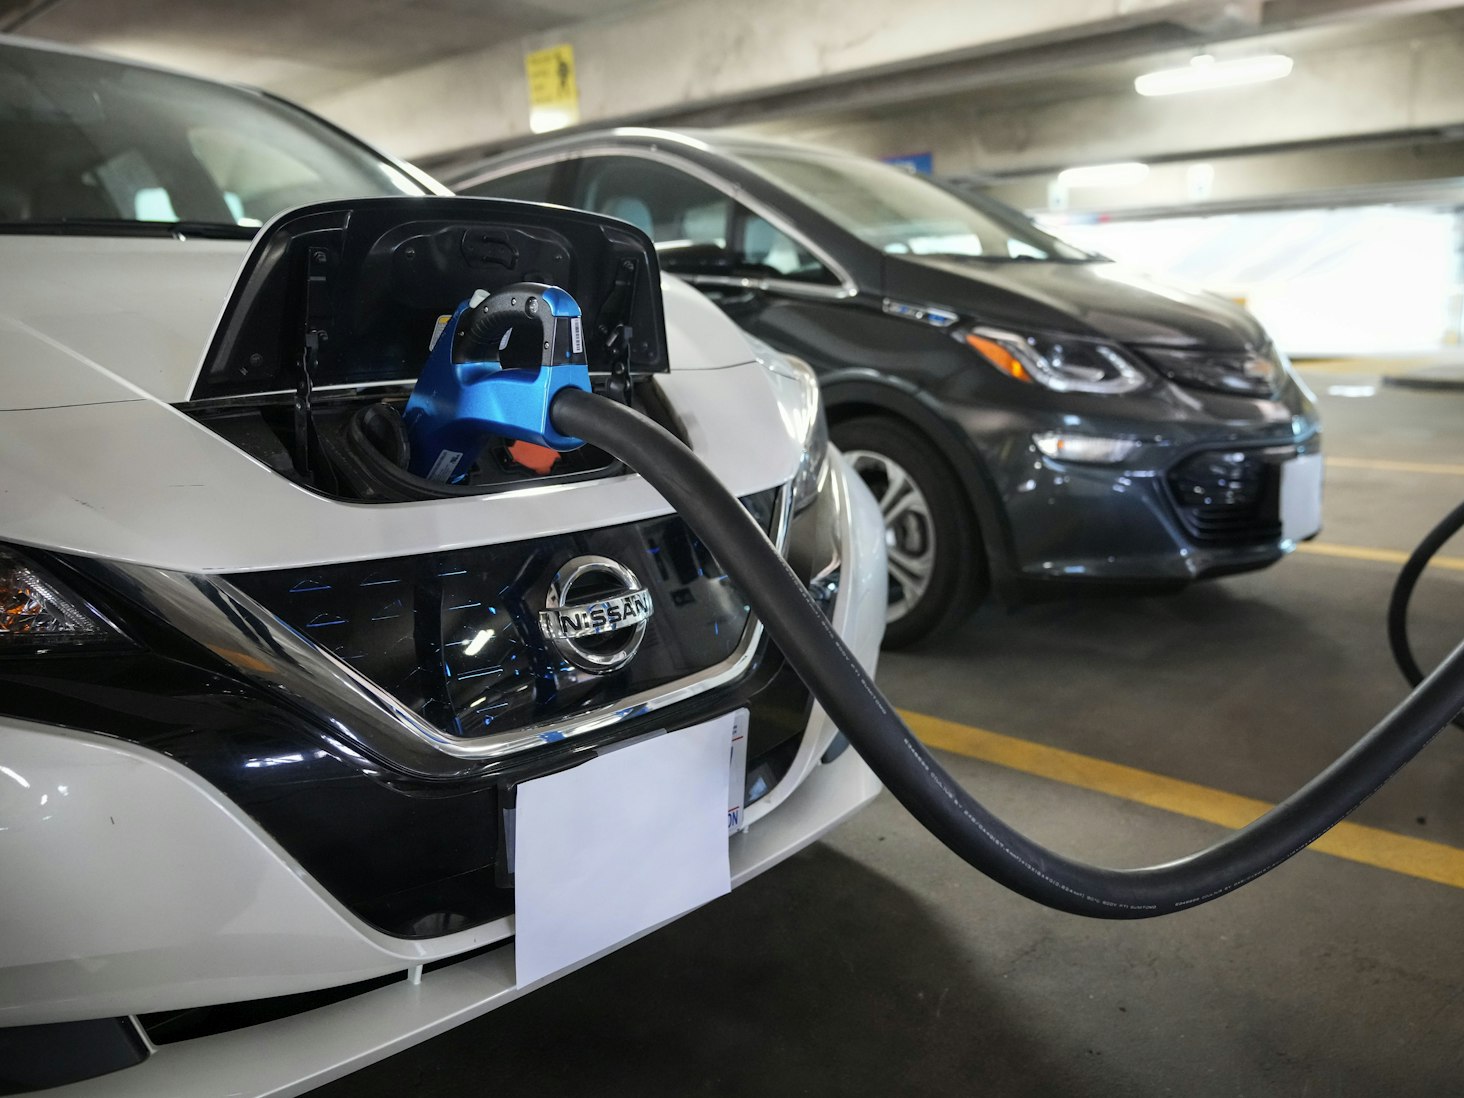 kuow-you-can-get-a-7-500-tax-credit-to-buy-an-electric-car-but-it-s